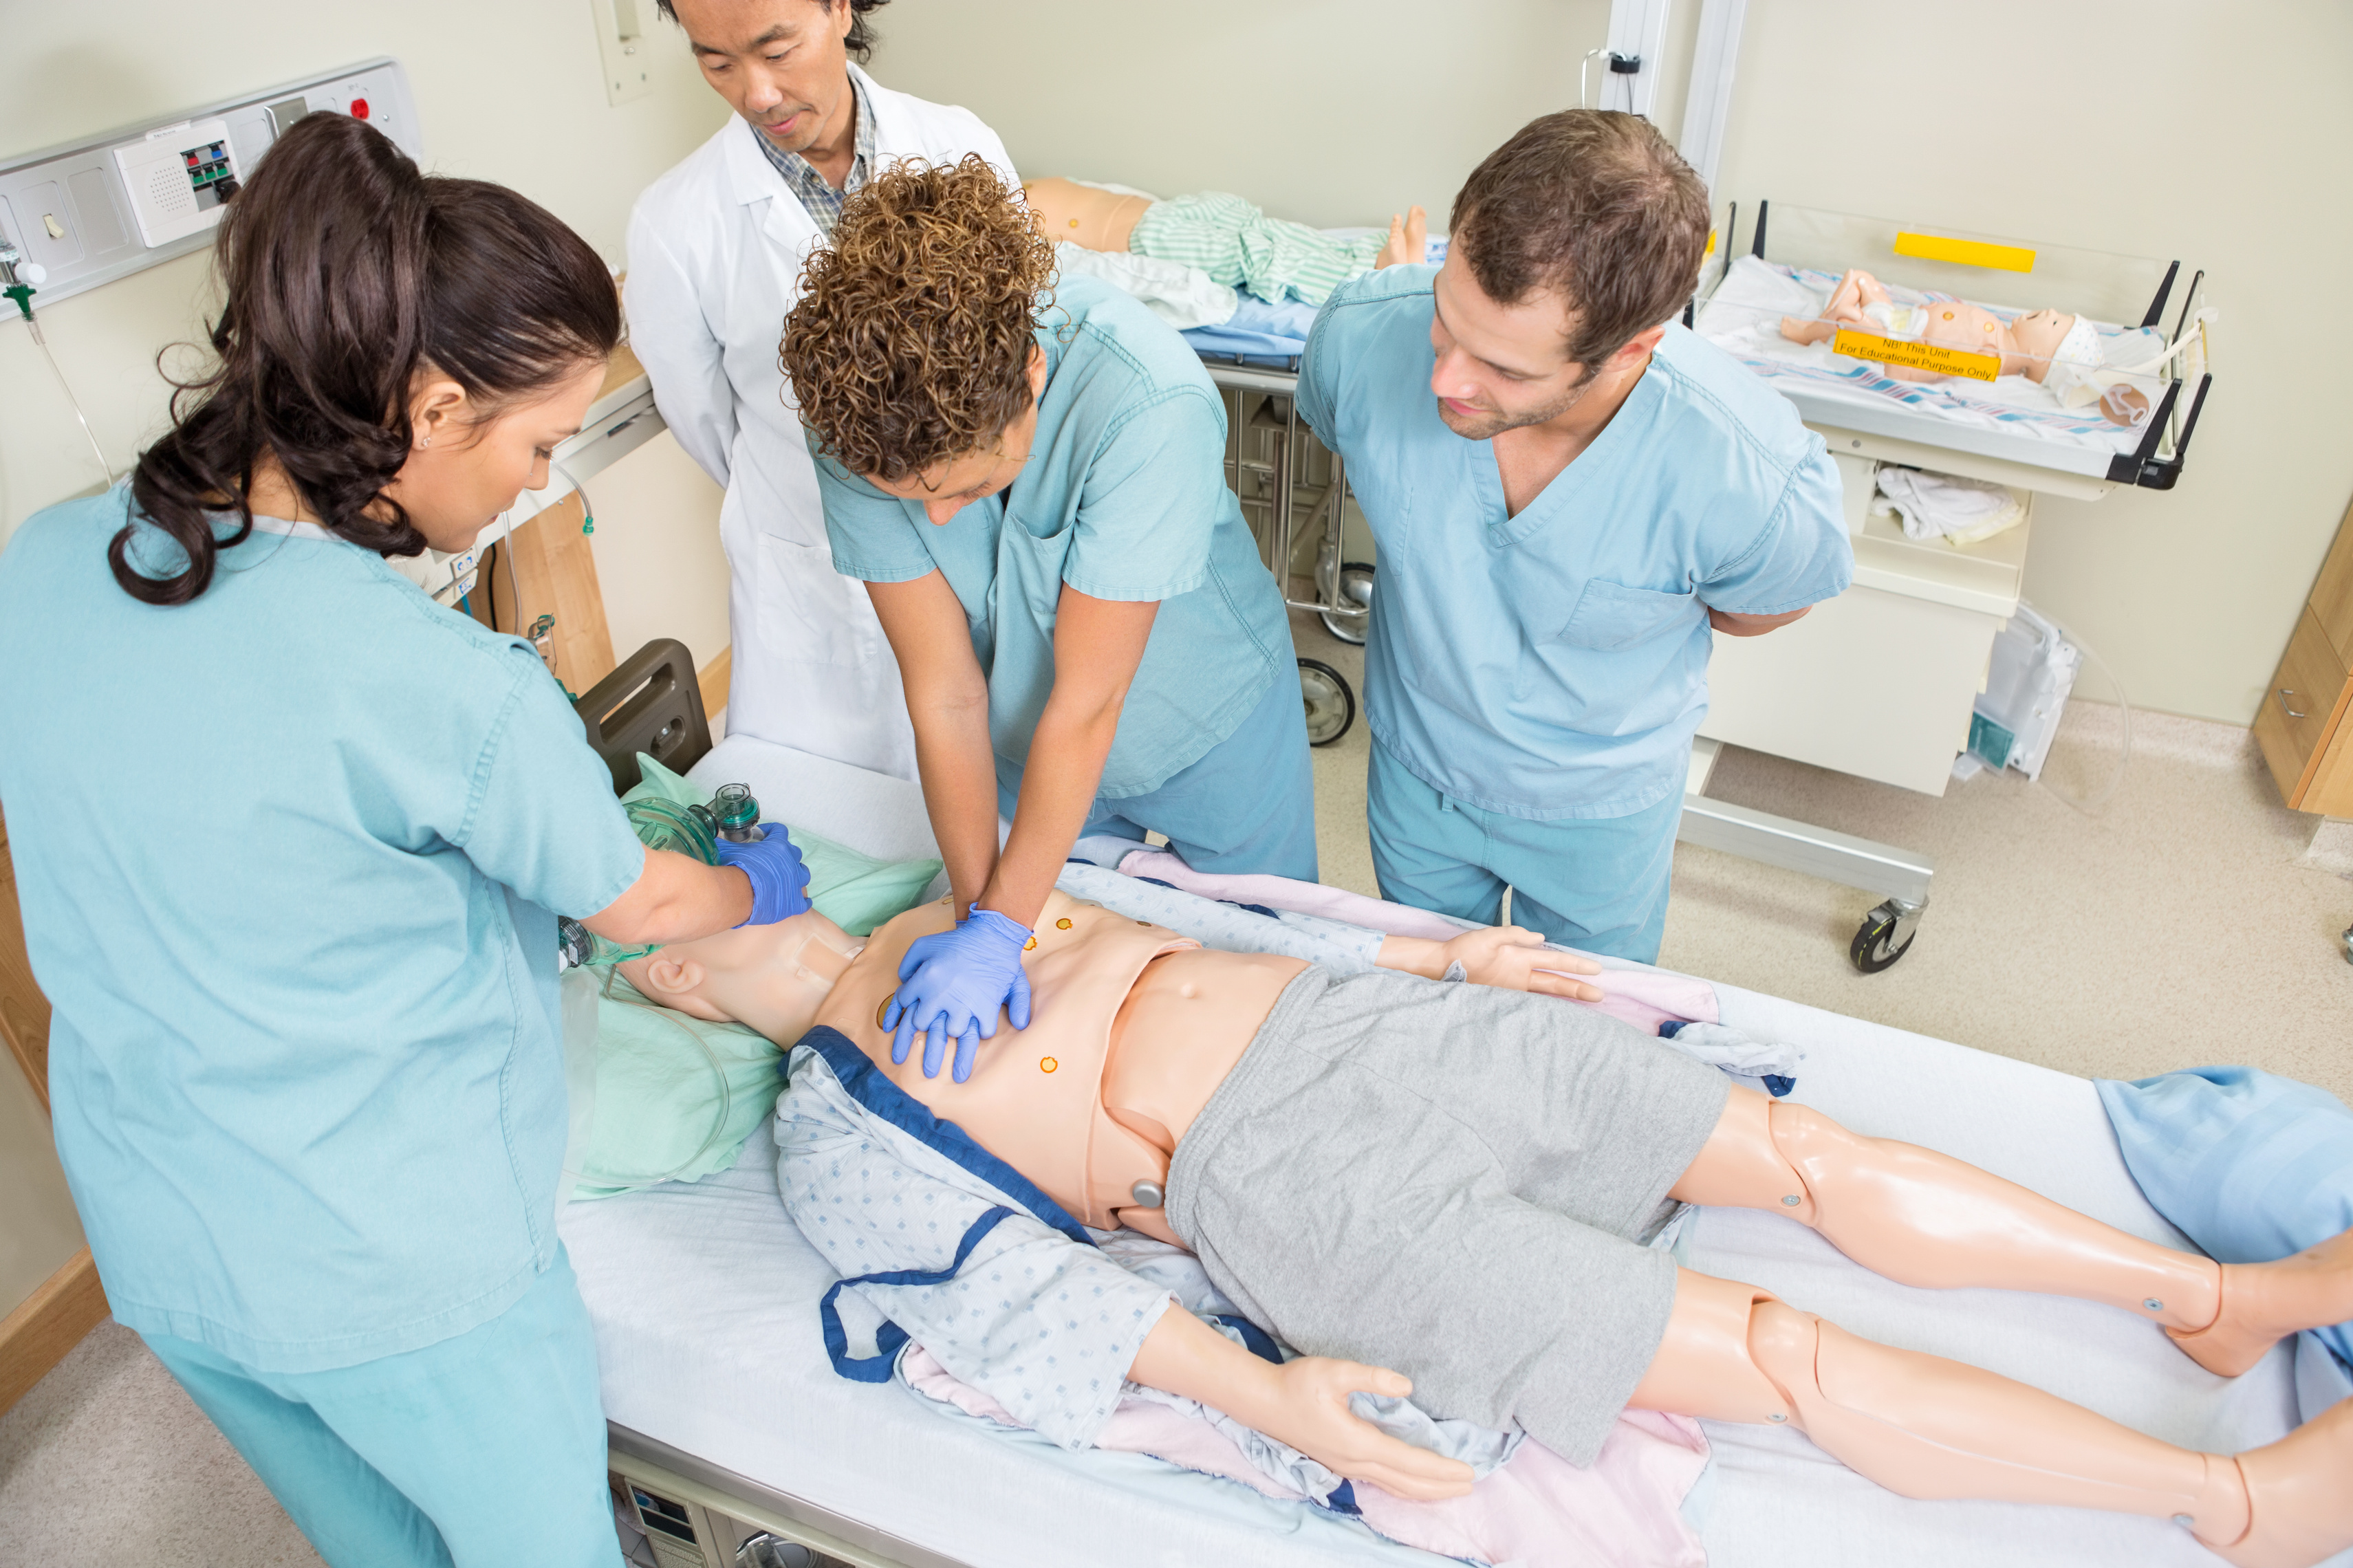 Nurses Performing CPR On Dummy Patient